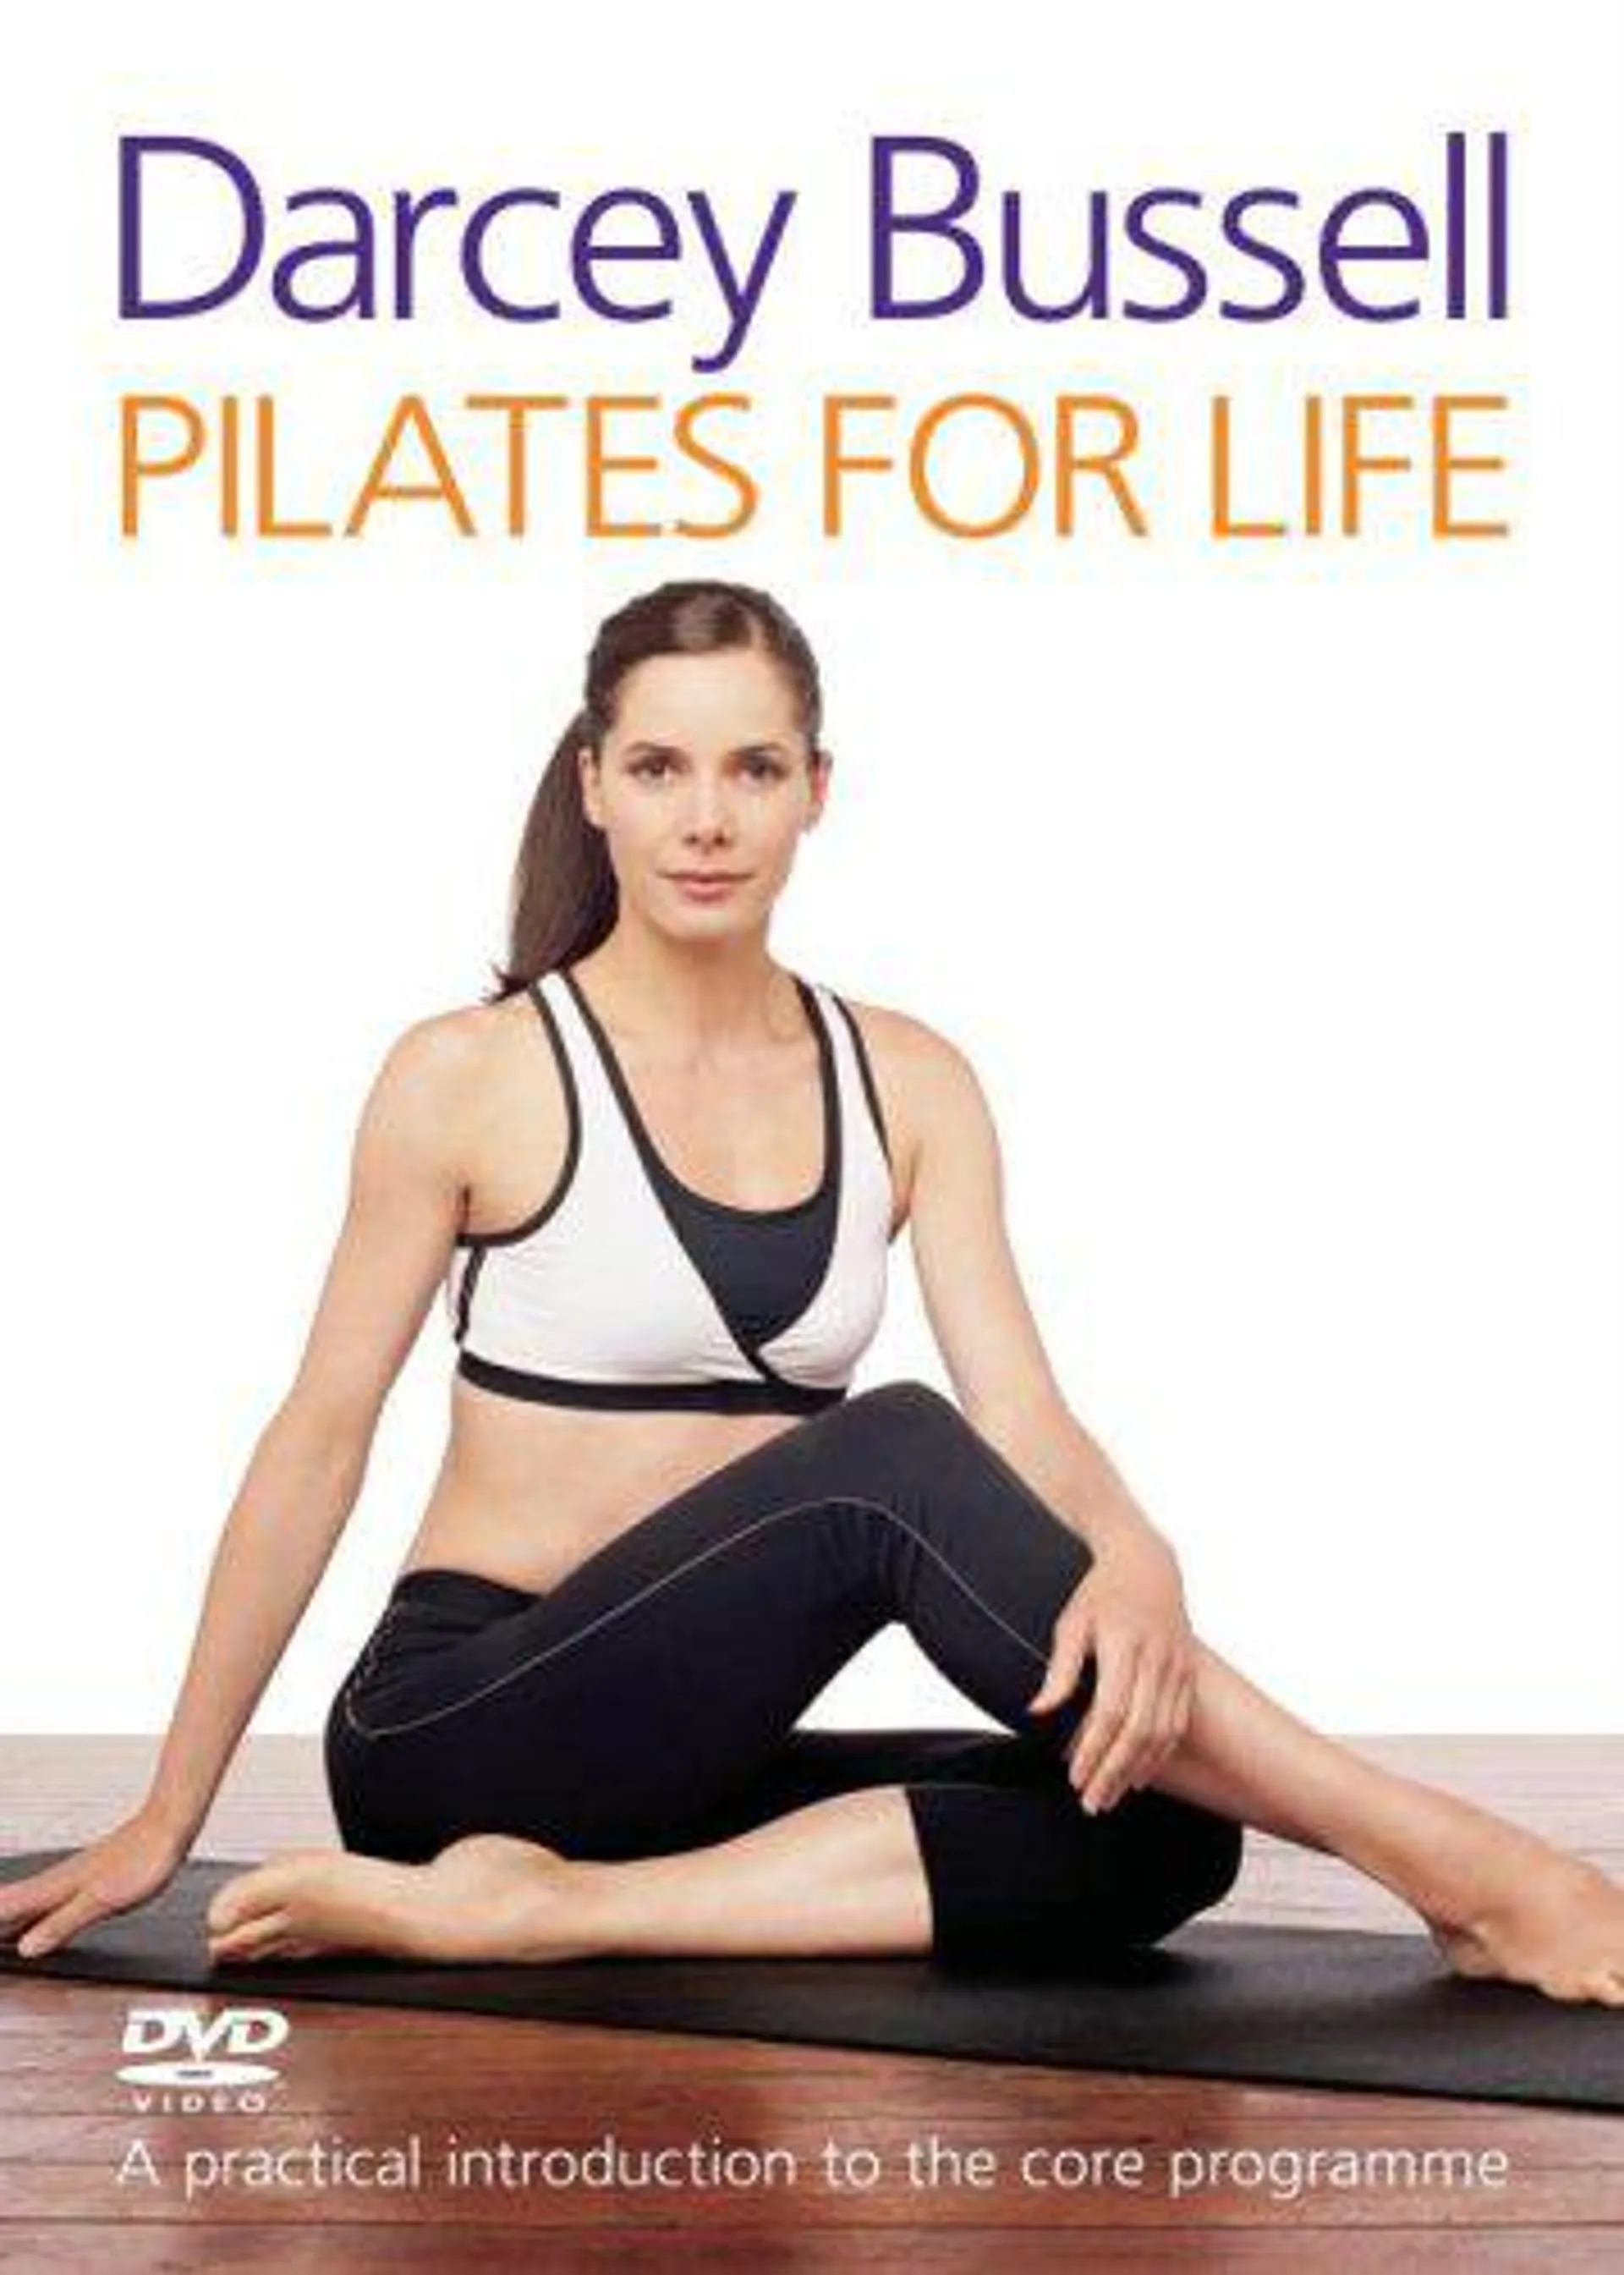 Bussell, Darcy - Pilates For Life